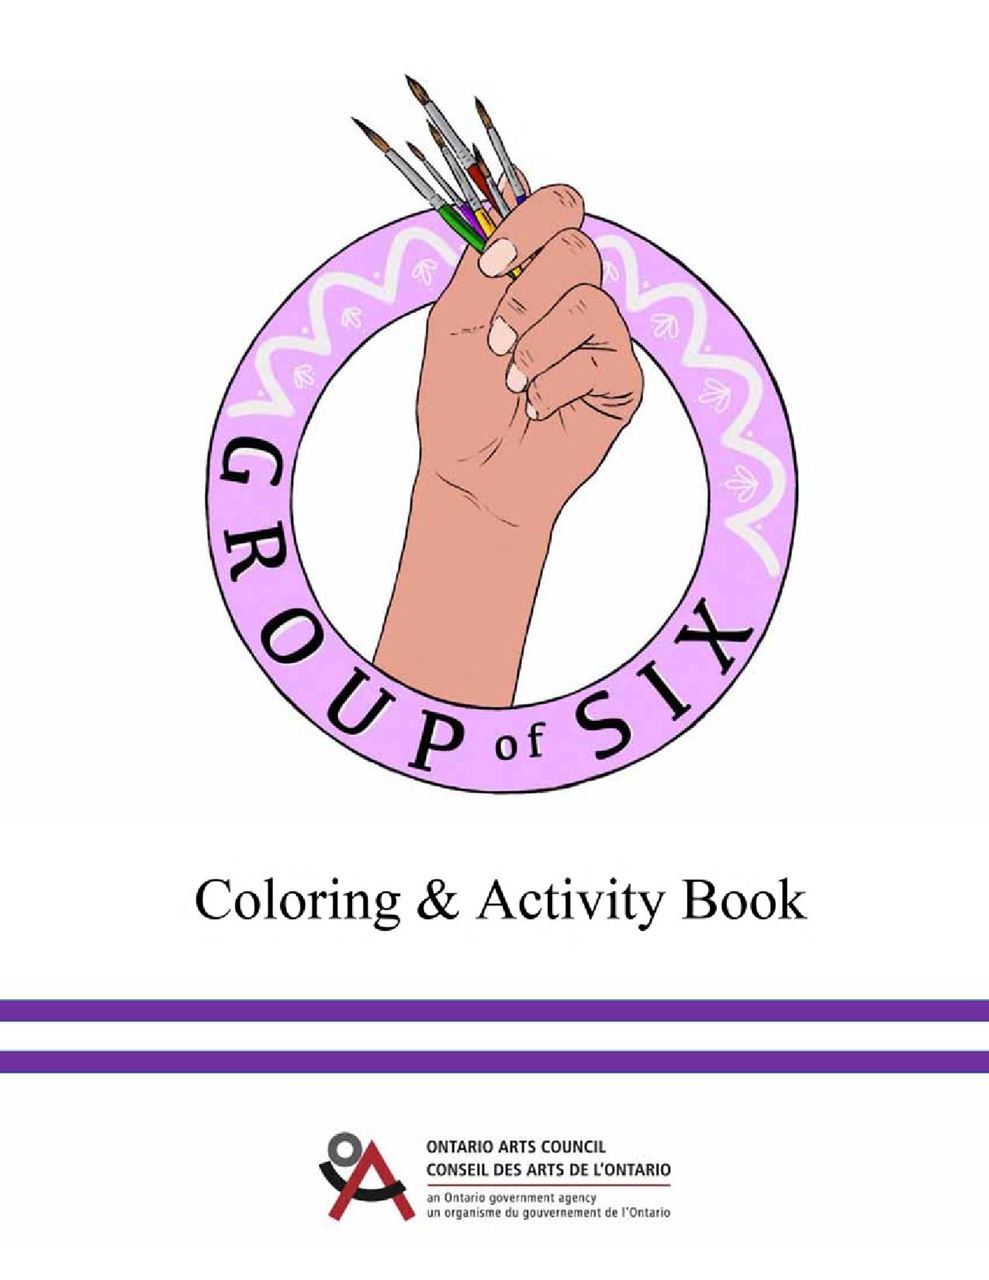 A link/image to a downloadable activity called "Group of Six Coloring & Activity Book"